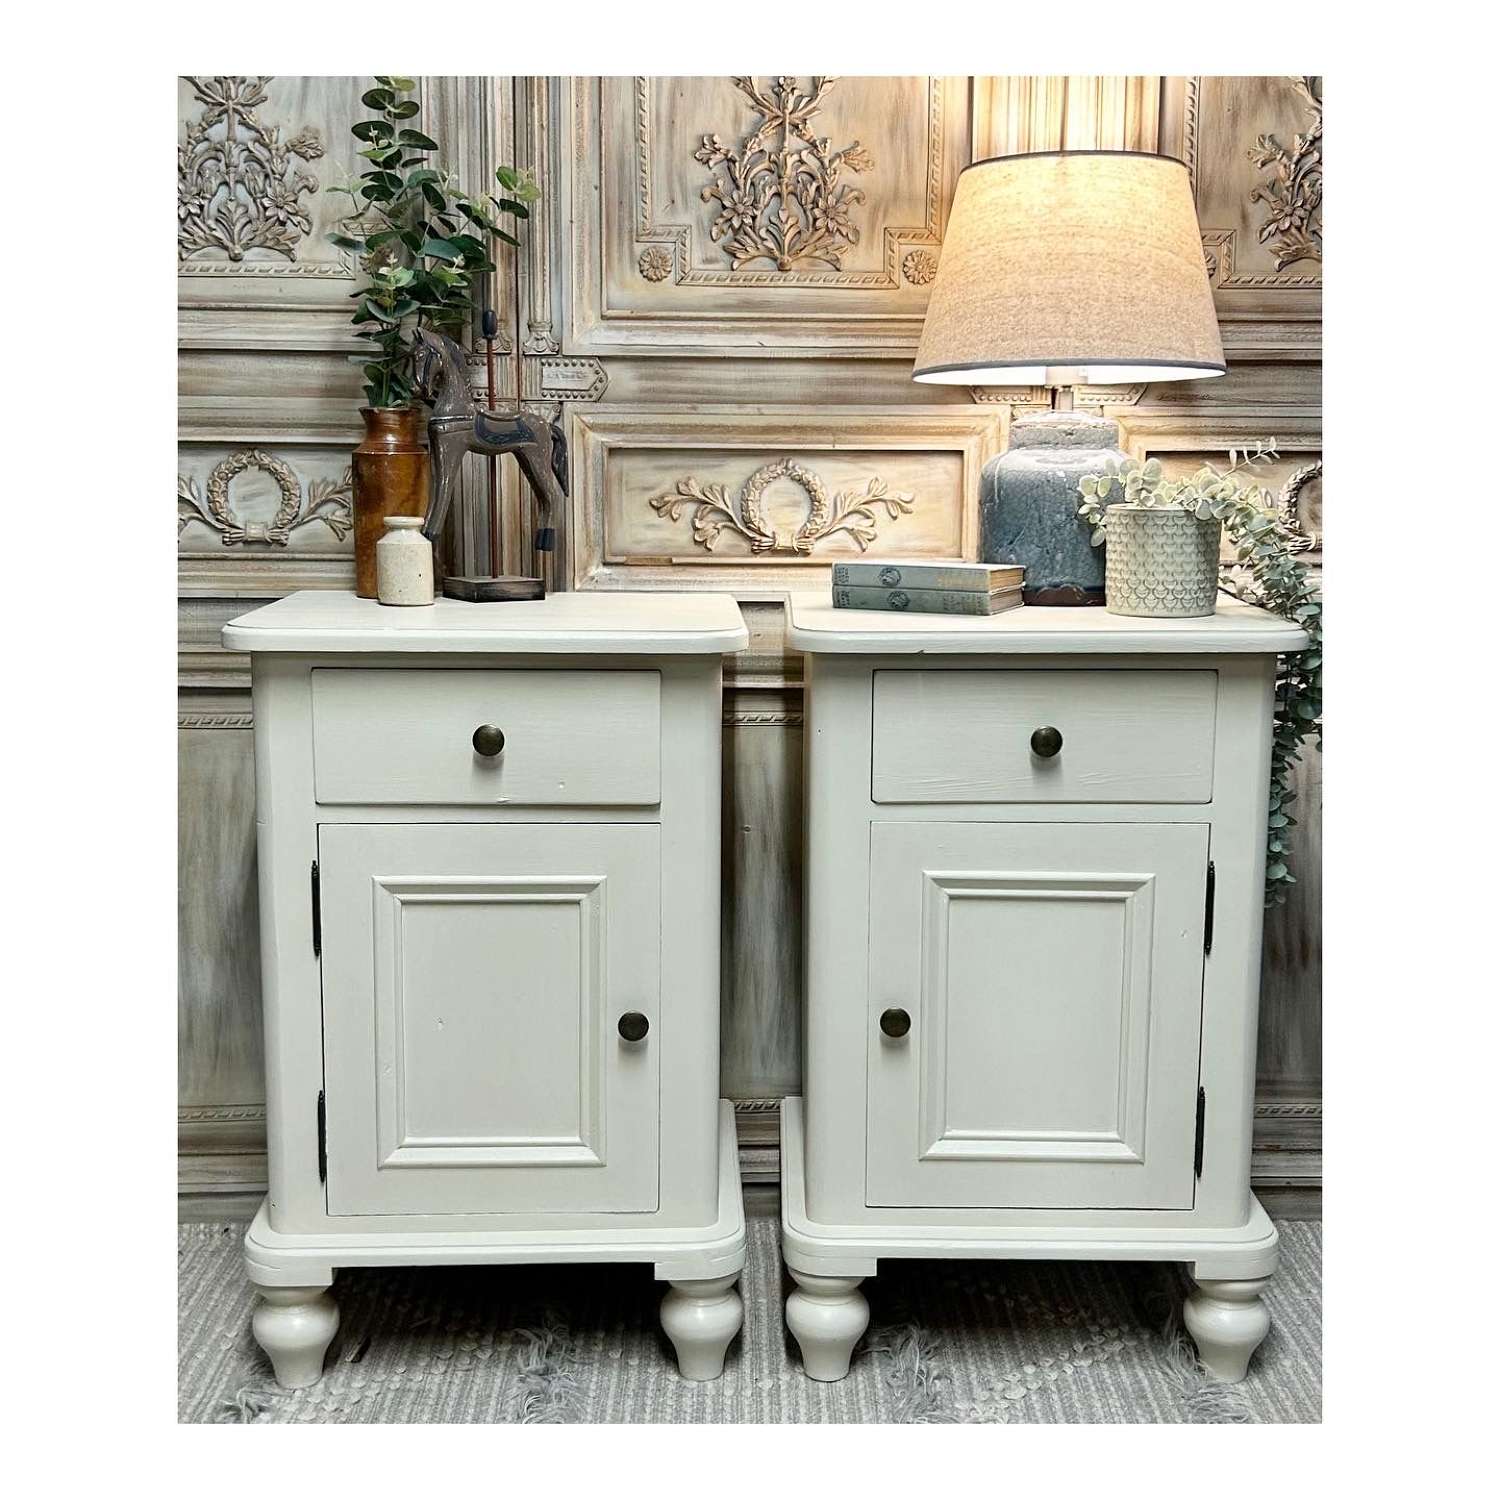 Pair of Painted Bedside Tables - Shaded White